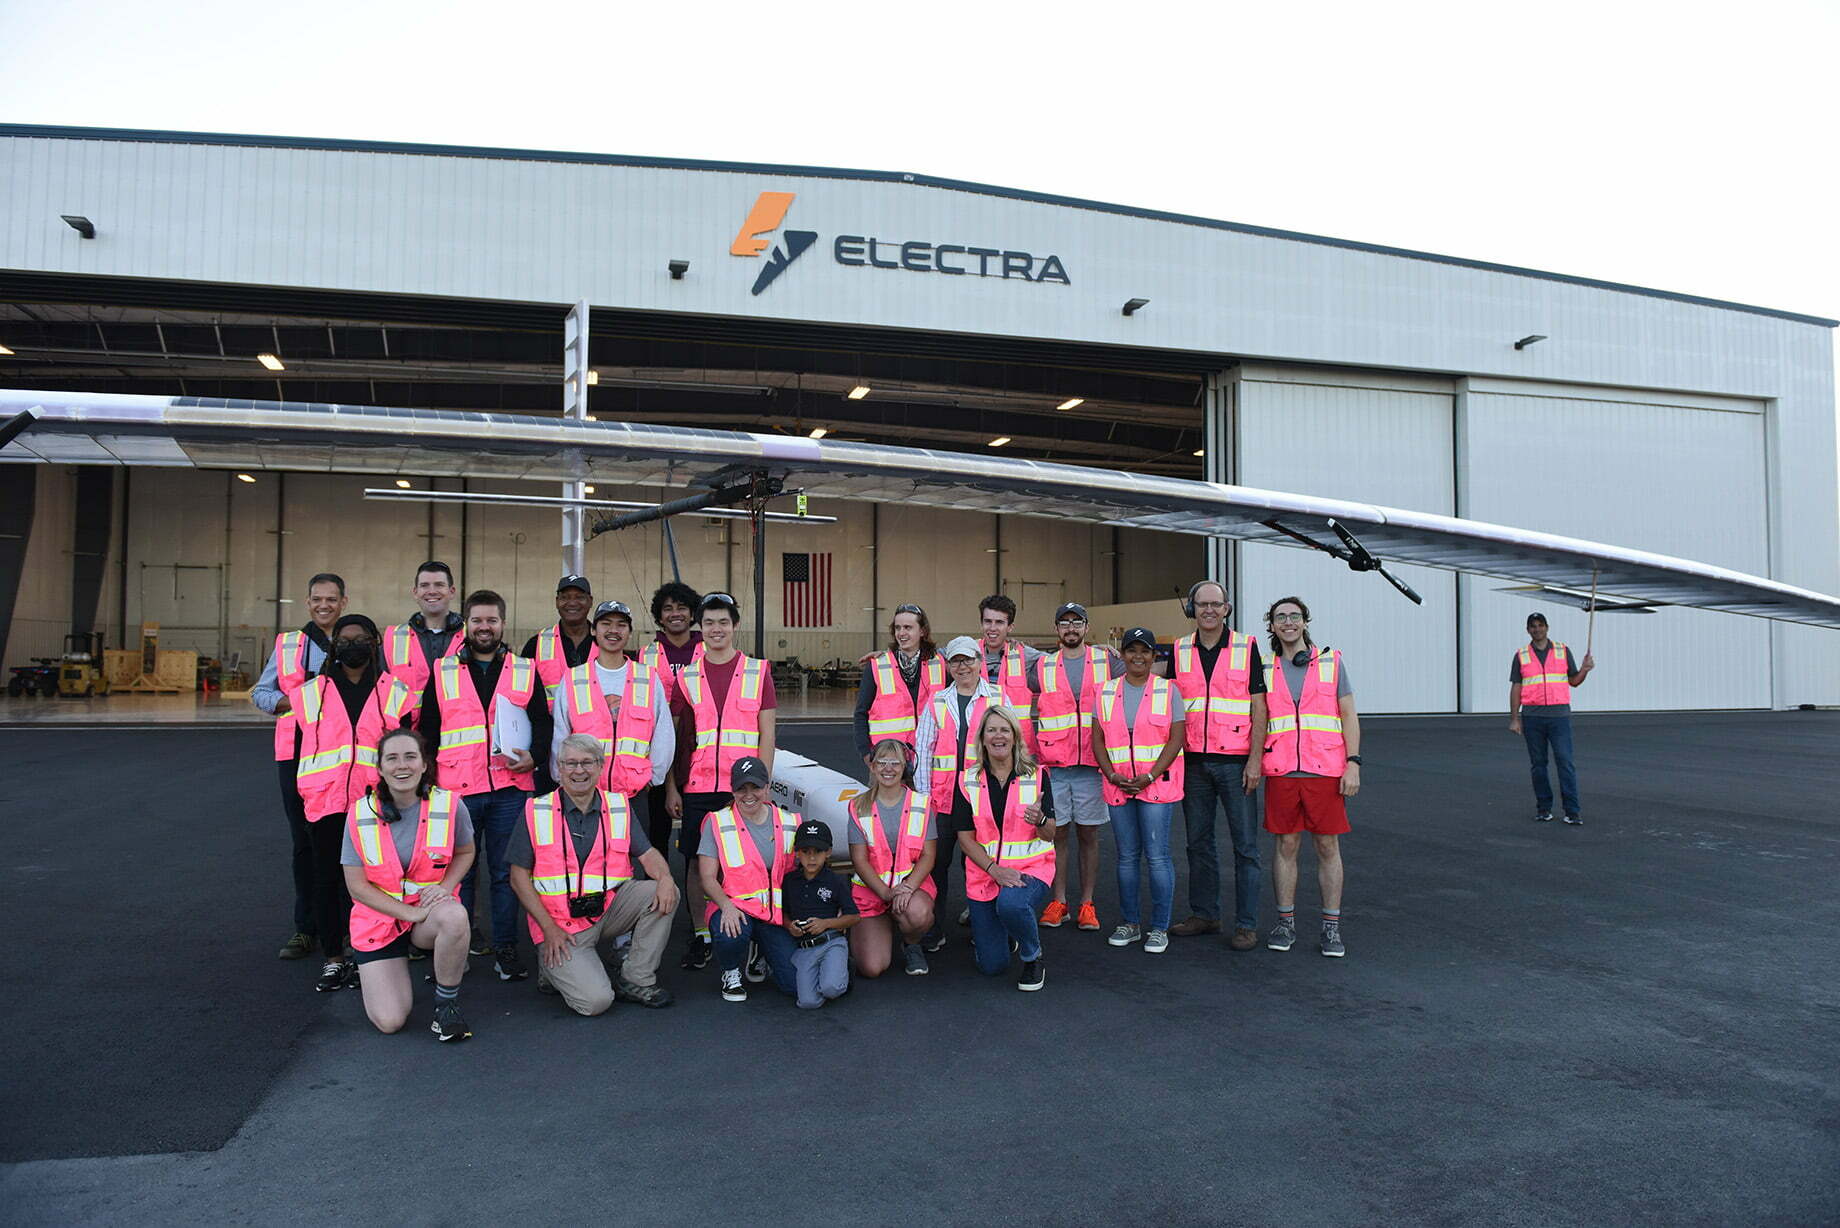 In addition to the Electra team, the “Dawn One” aircraft team included researchers and students from MIT, Harvard, Virginia Tech, Penn State, Stanford, Tuskegee, Embry Riddle, University of Michigan, San Diego State, and The University of Texas at El Paso.